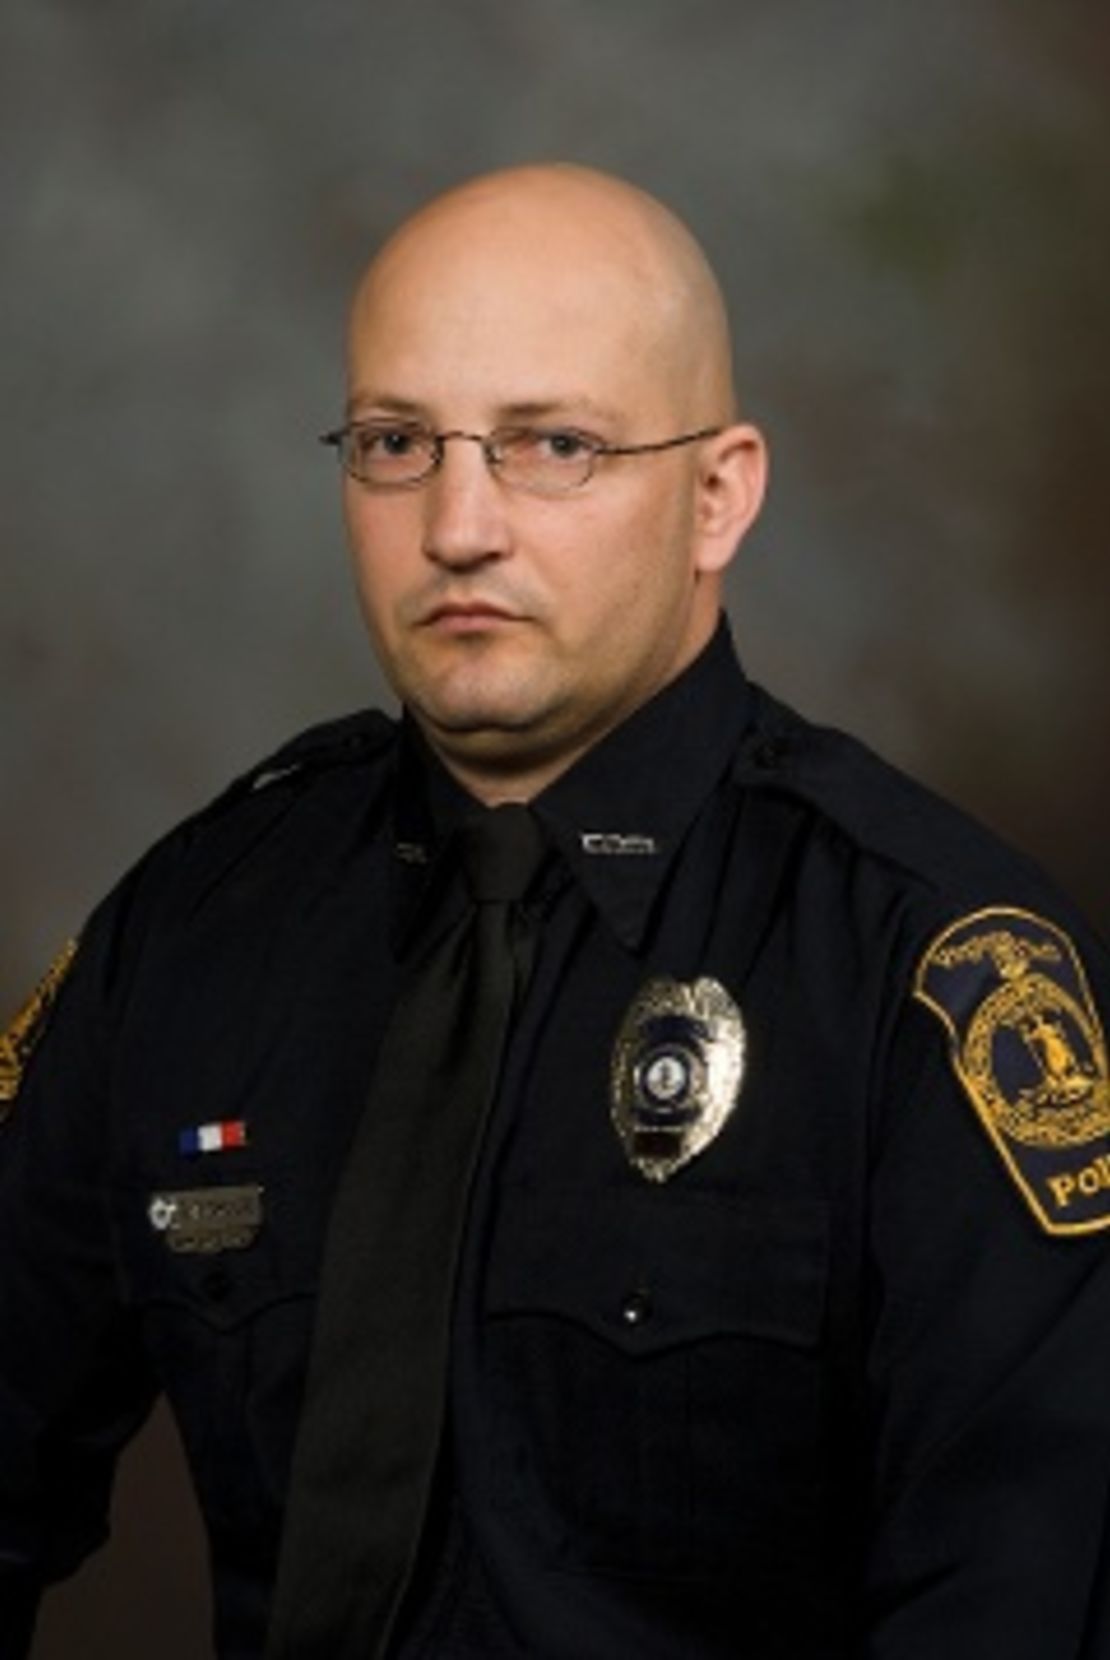 Officer Deriek Crouse was fatally shot during a December 8, 2011, traffic stop on the Virginia Tech campus.